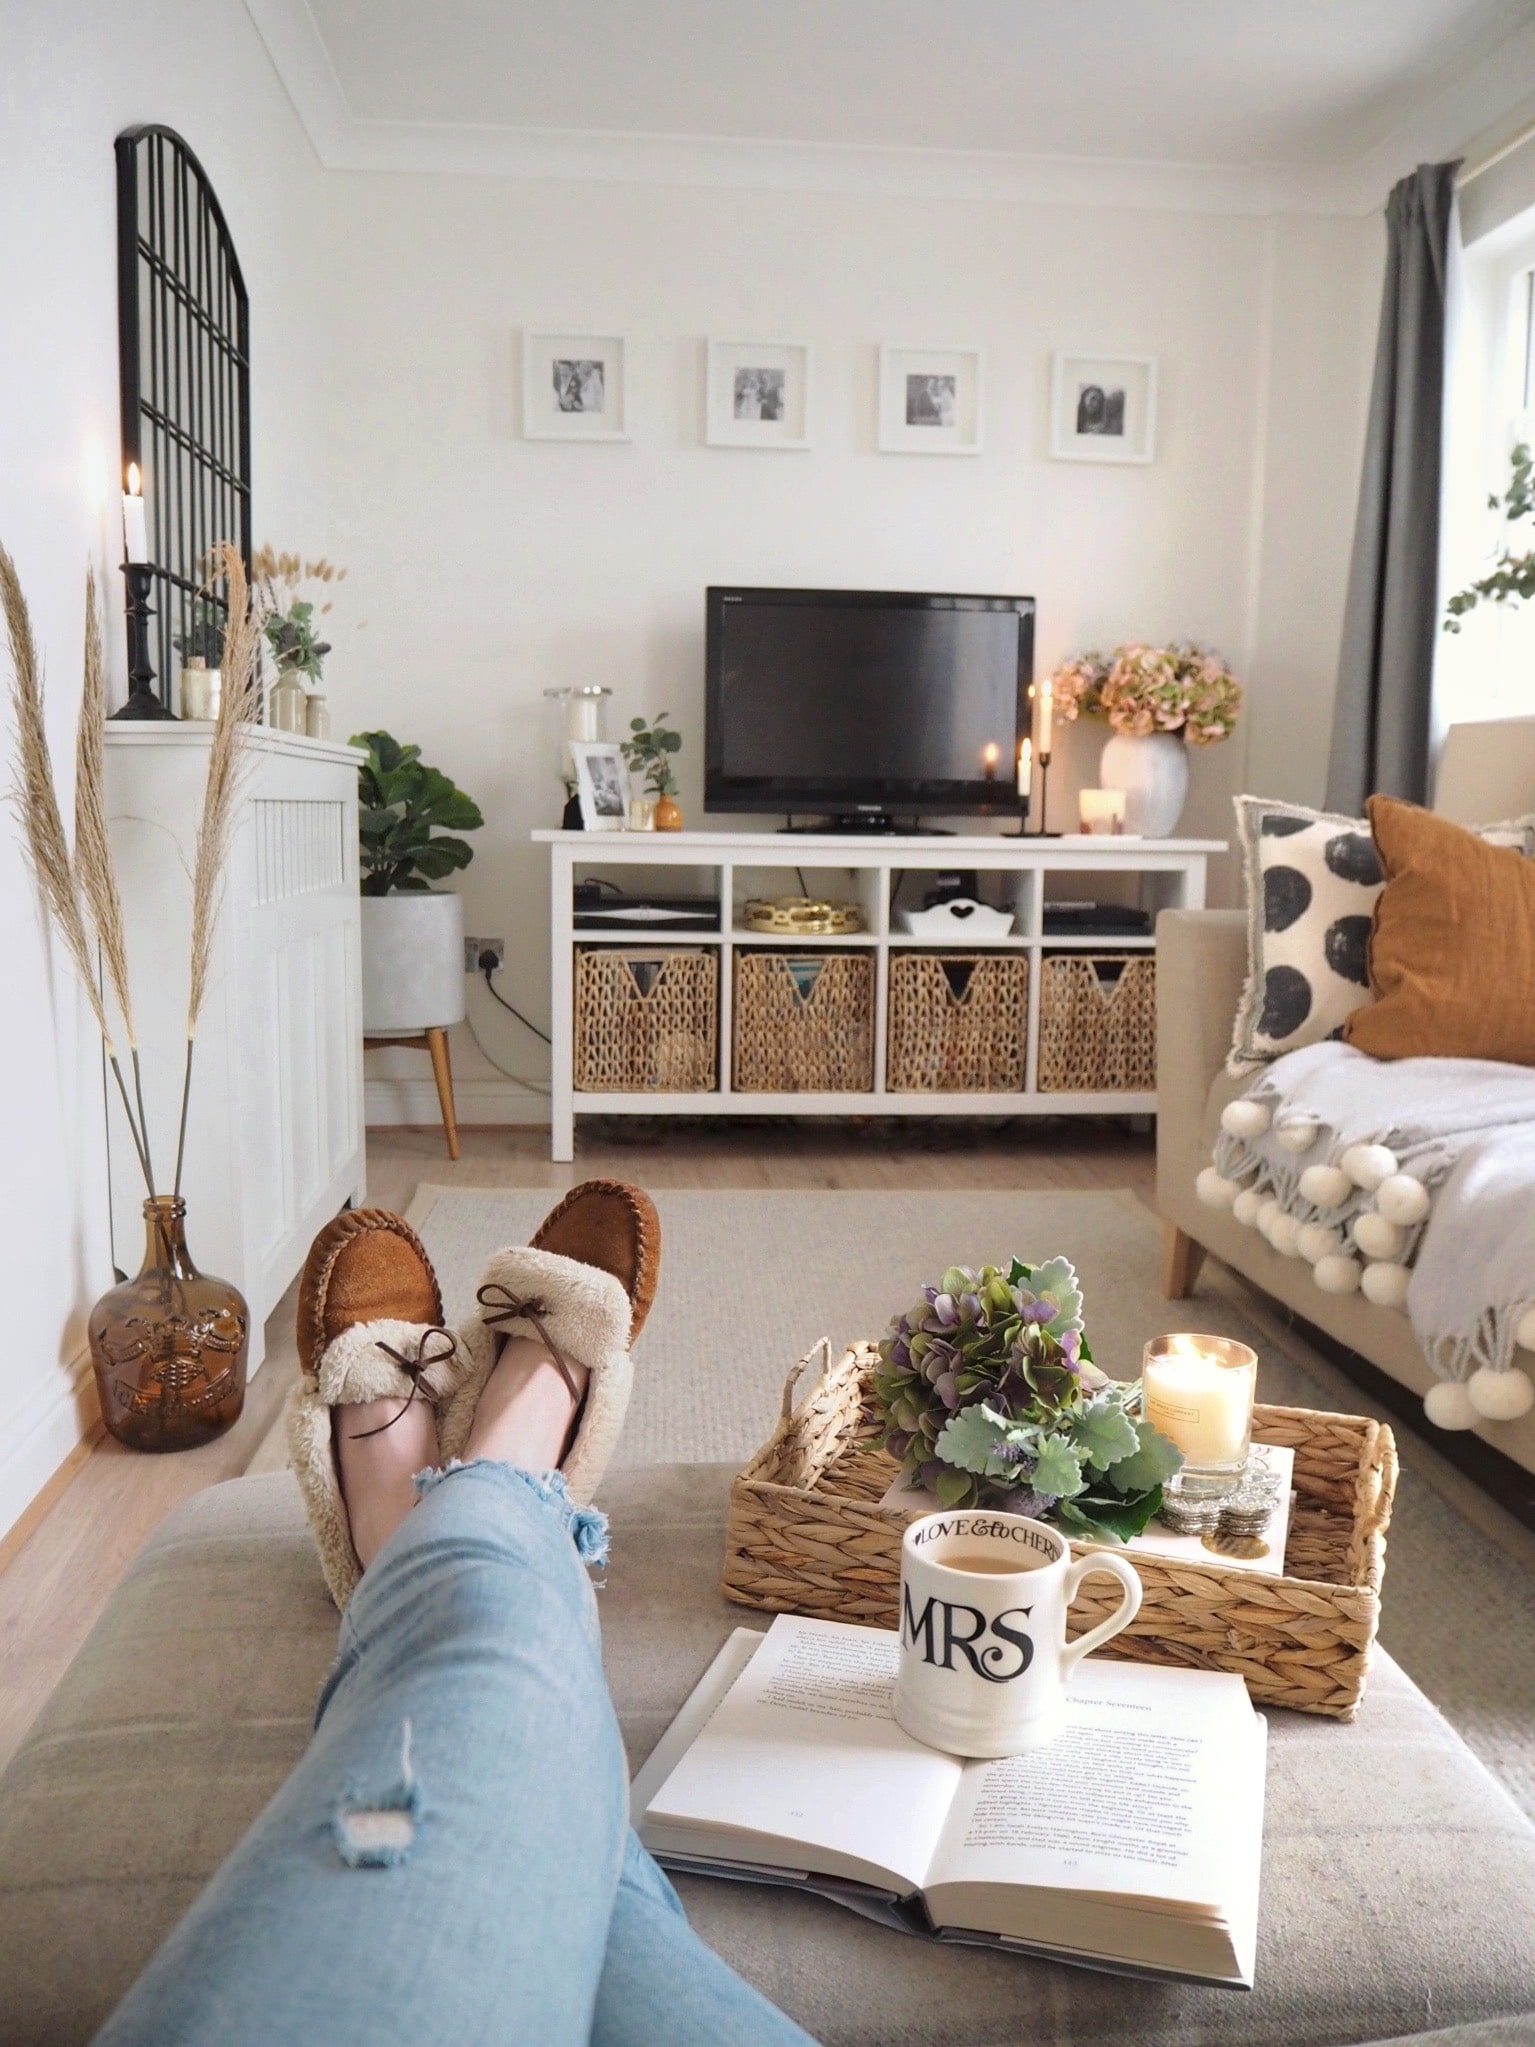 Tricks to make your small home and rooms look bigger, including ideas on how to maximise space, paint colour to choose, clever storage ideas, and ways to trick the eye into making a room appear larger than it really is. Small home living tips and advice.